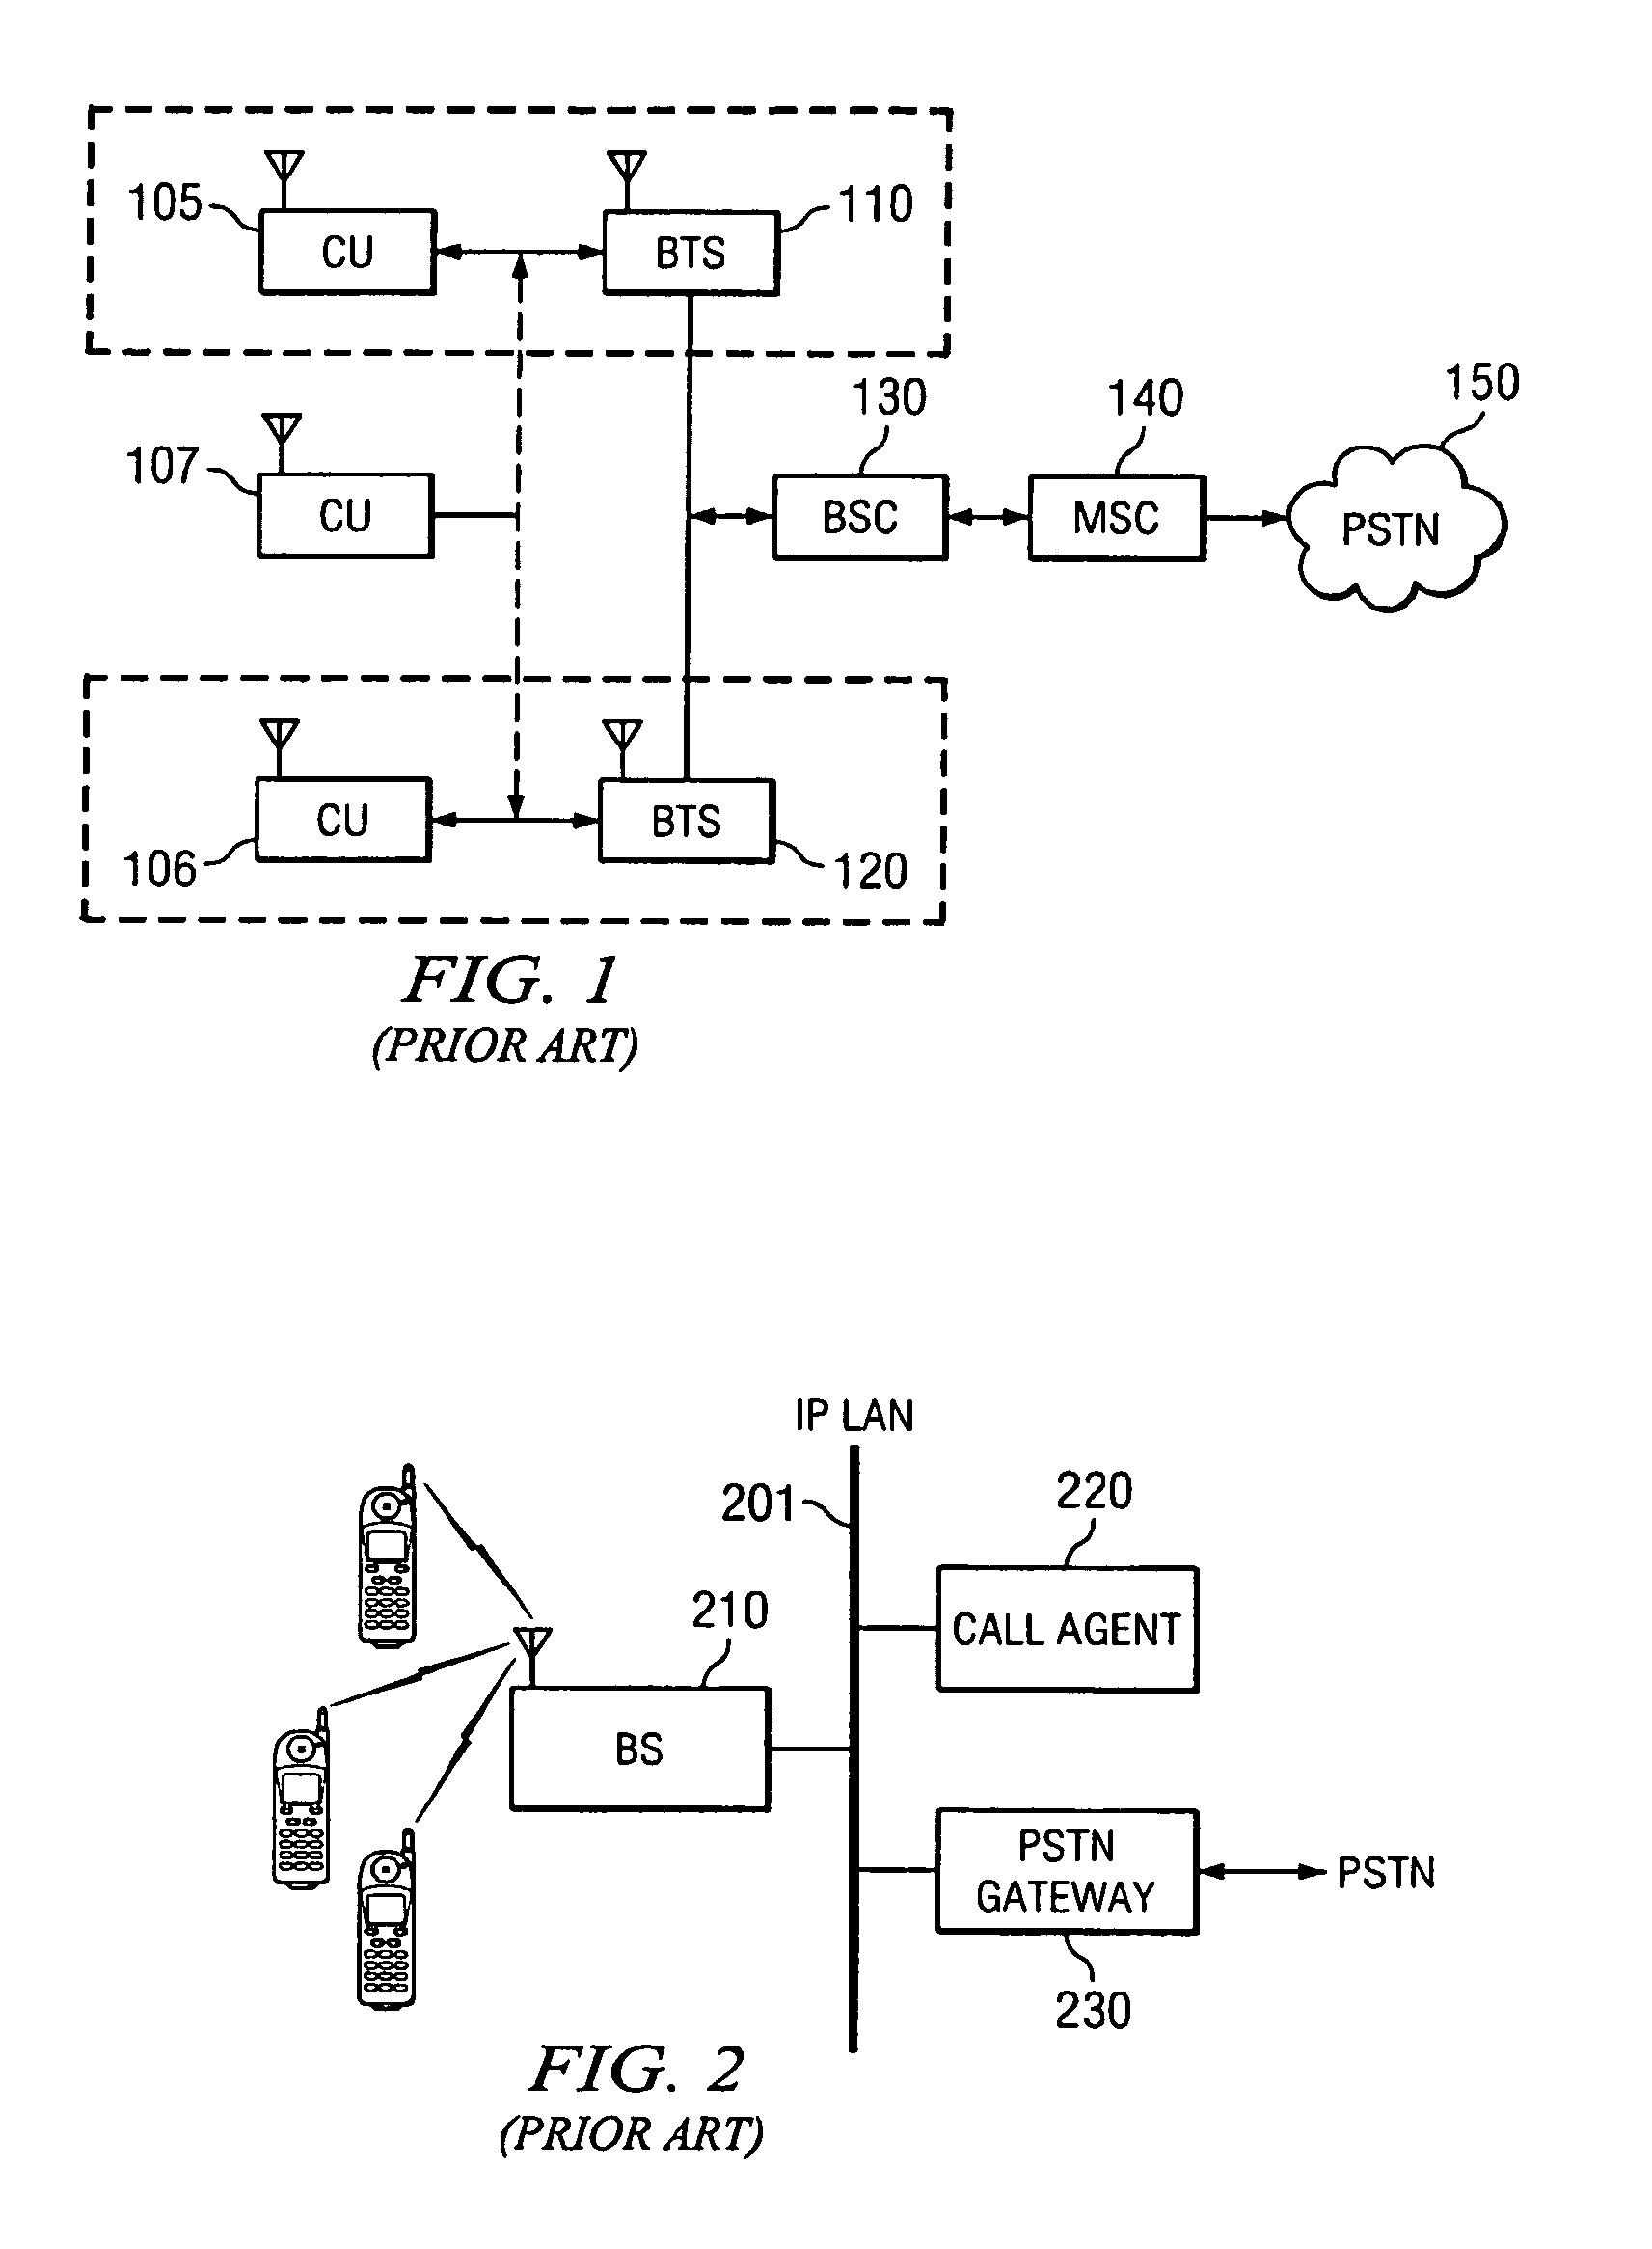 System and method of linking a wireless signaling protocol with a media gateway control protocol in a packet-based network